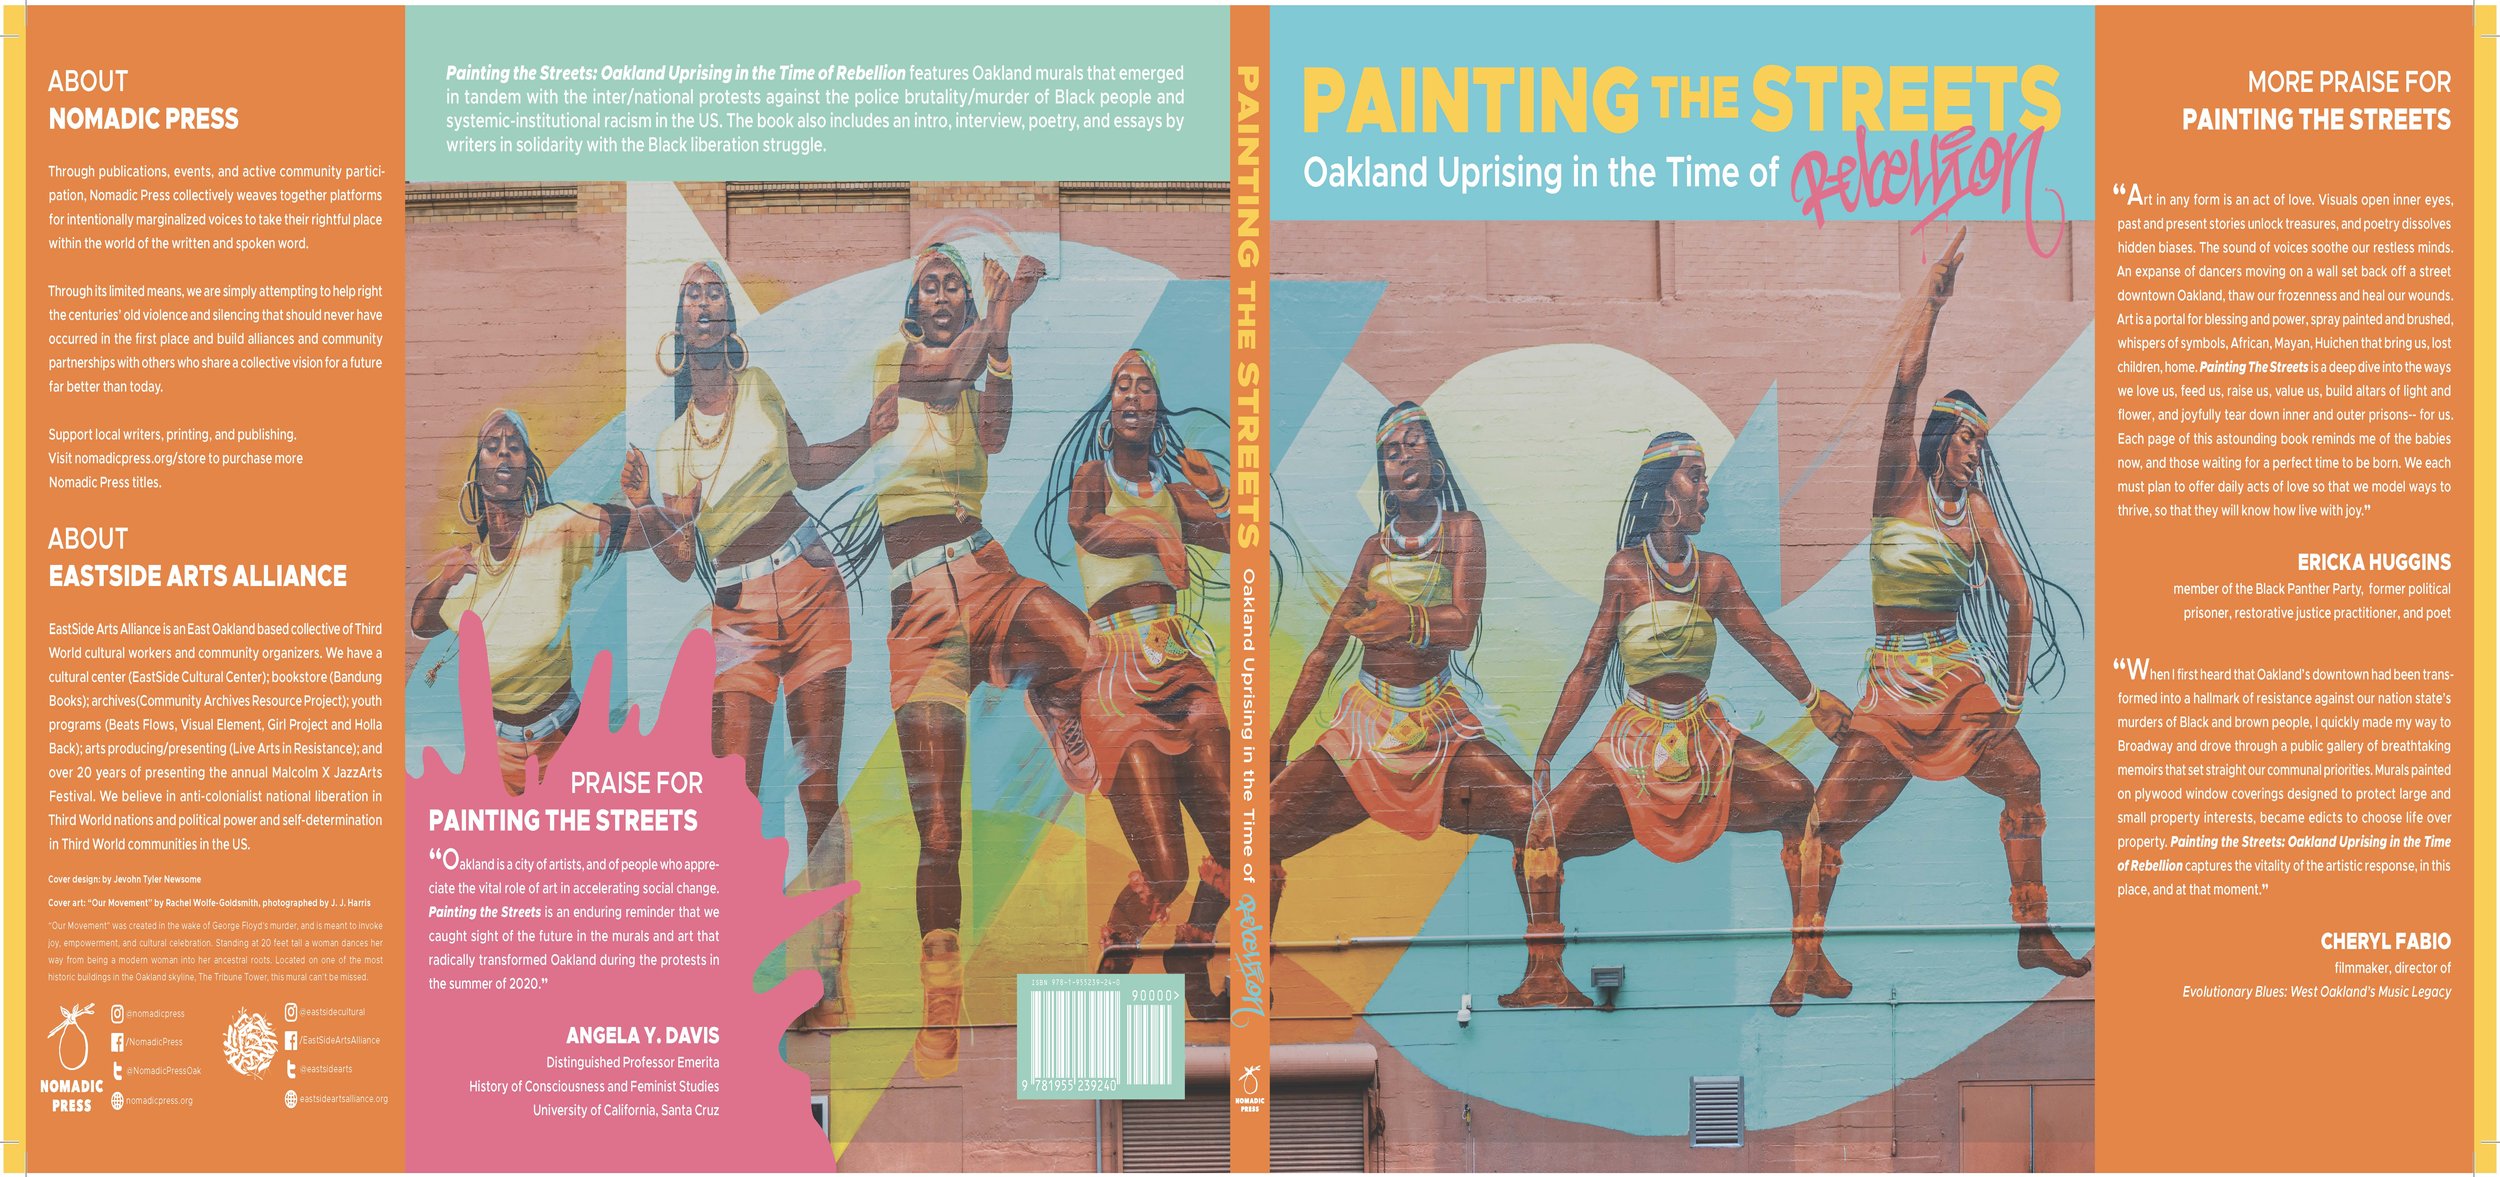  ‘Painting the Streets: Oakland Uprising in the Time of Rebellion’ dust jacket (exterior) 